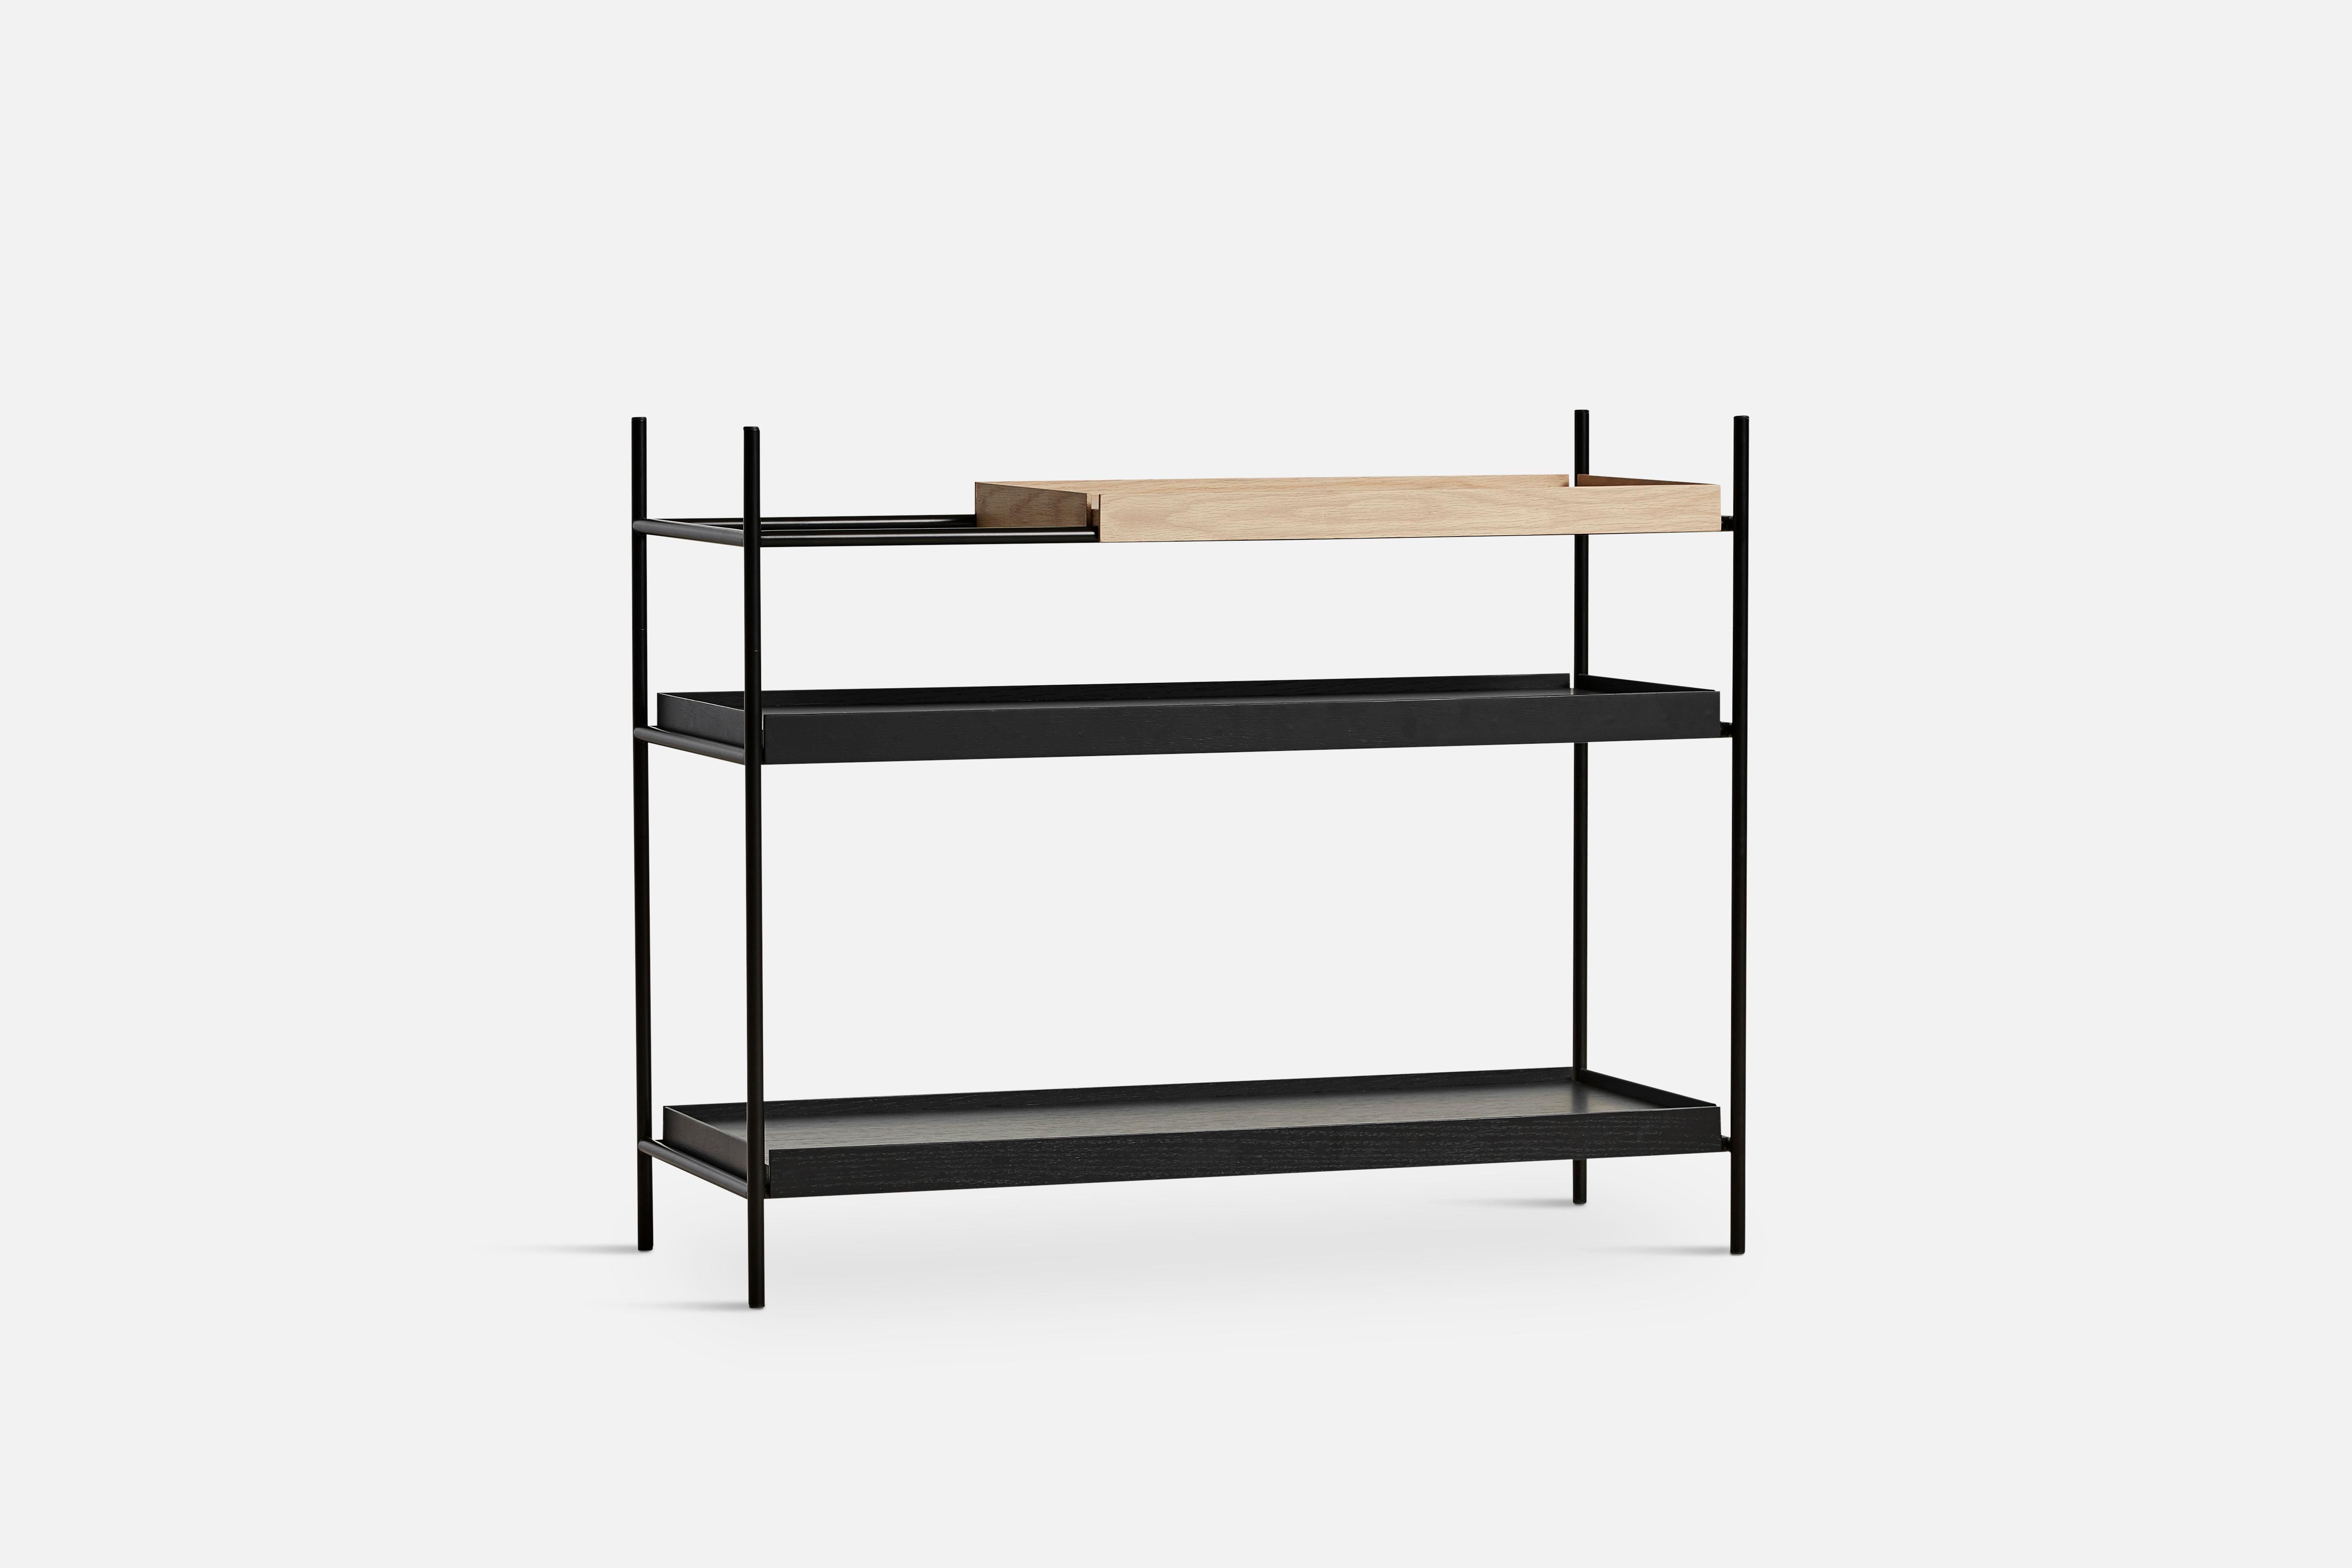 Low Oak and Black Tray shelf II by Hanne Willmann.
Materials: Metal, oak.
Dimensions: D 40 x W 100 x H 81 cm.
Also available in different tray conbinations and 2 sizes: H81, H 201 cm.

Hanne Willmann is a dynamic German designer with her own